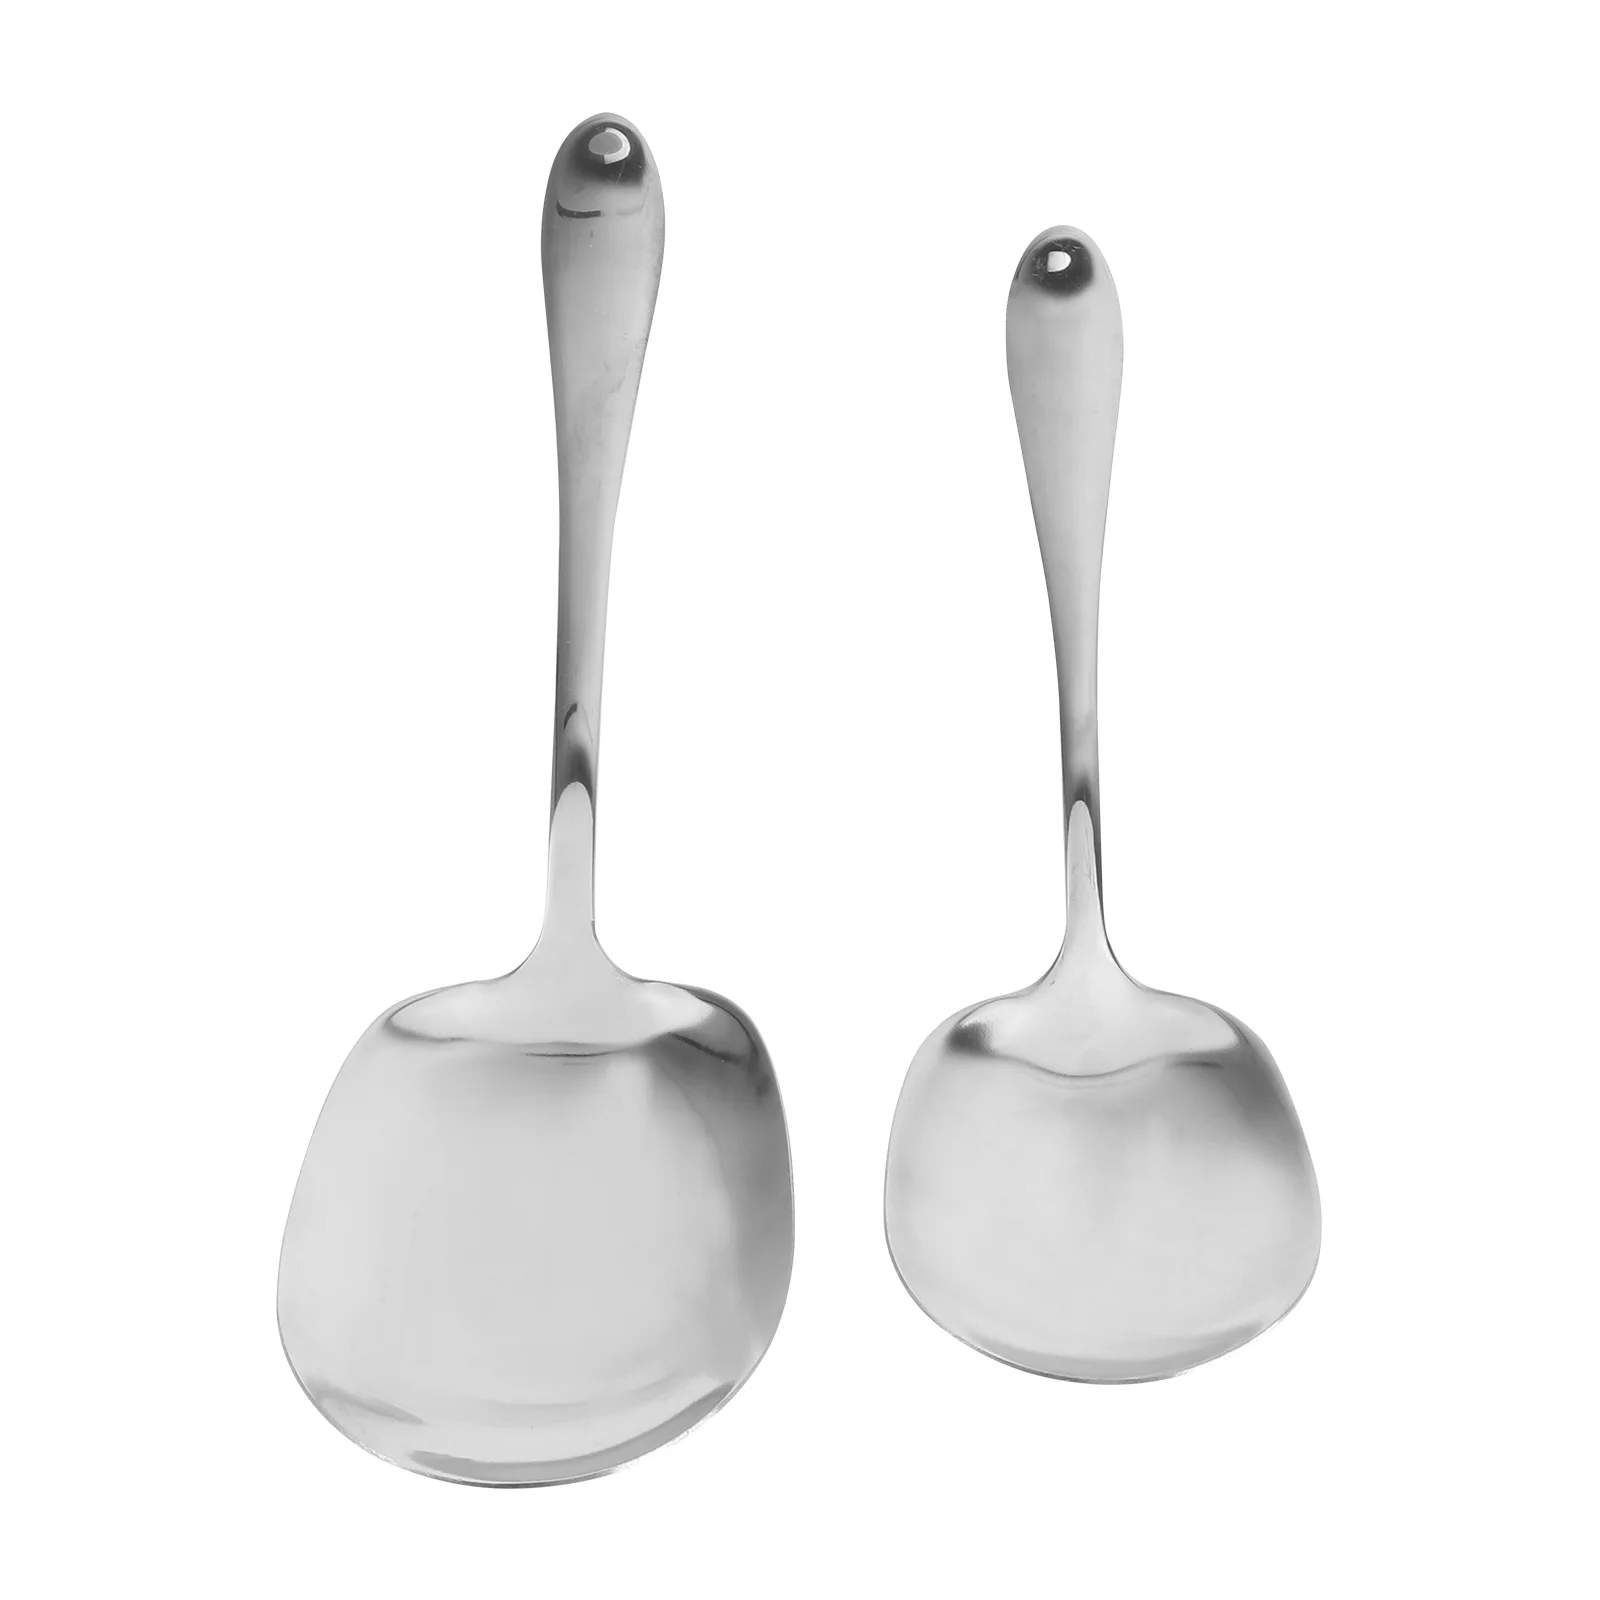 

2PCS Dessert Spoons Protein Spoon Dessert Scoop Stainless Steel Tablespoon Coffee Tablespoon Cocktail Stirrer